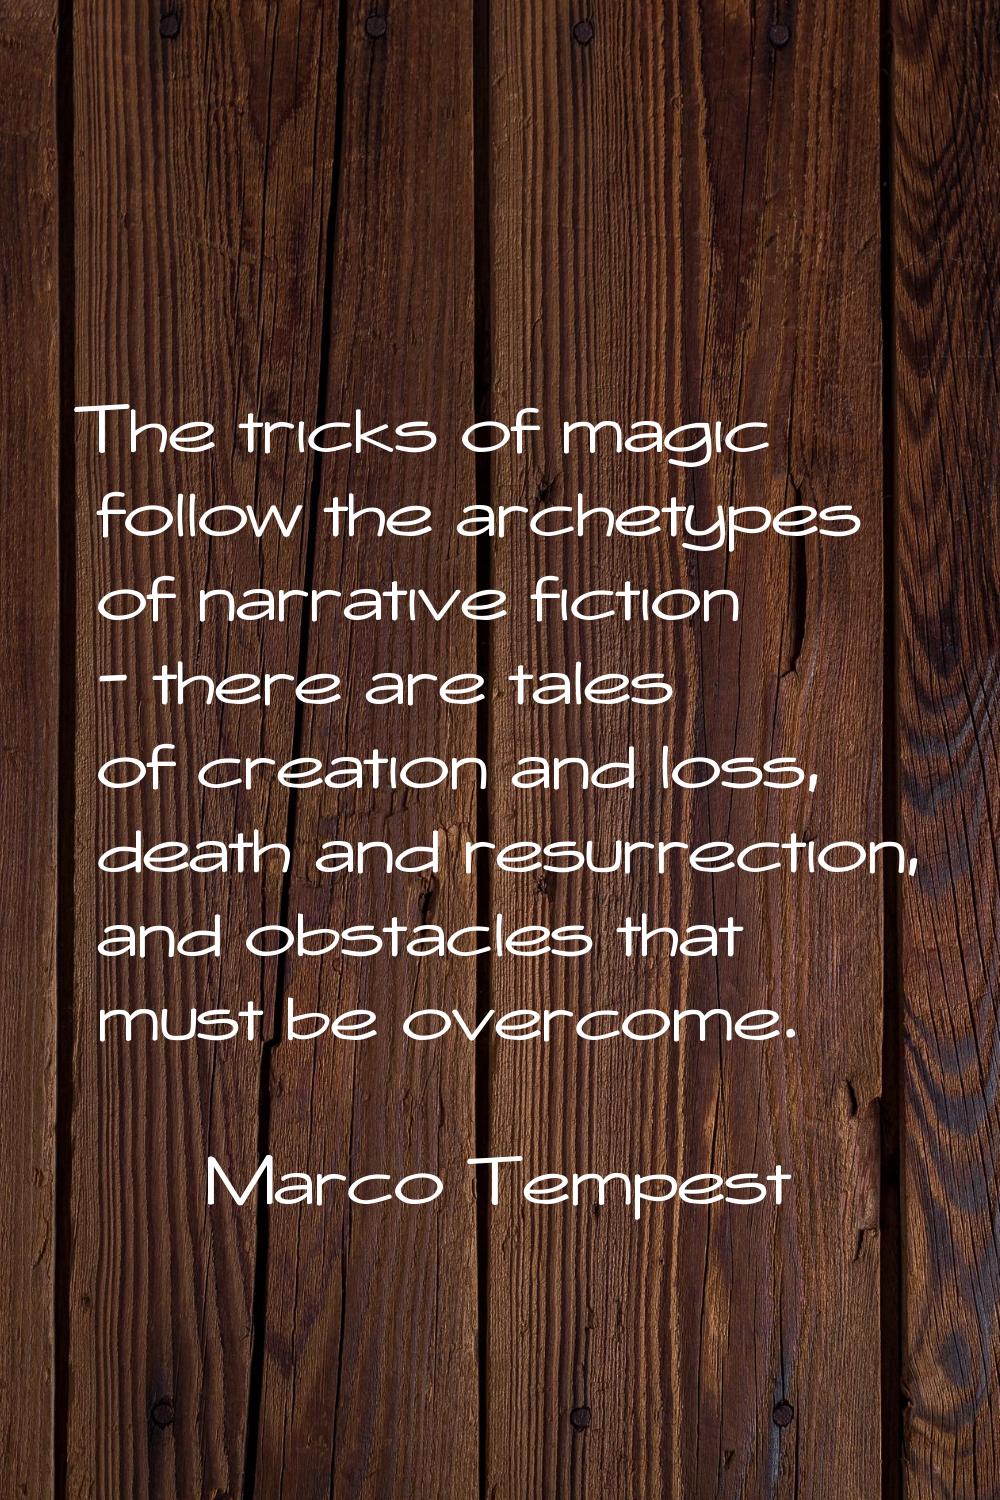 The tricks of magic follow the archetypes of narrative fiction - there are tales of creation and lo